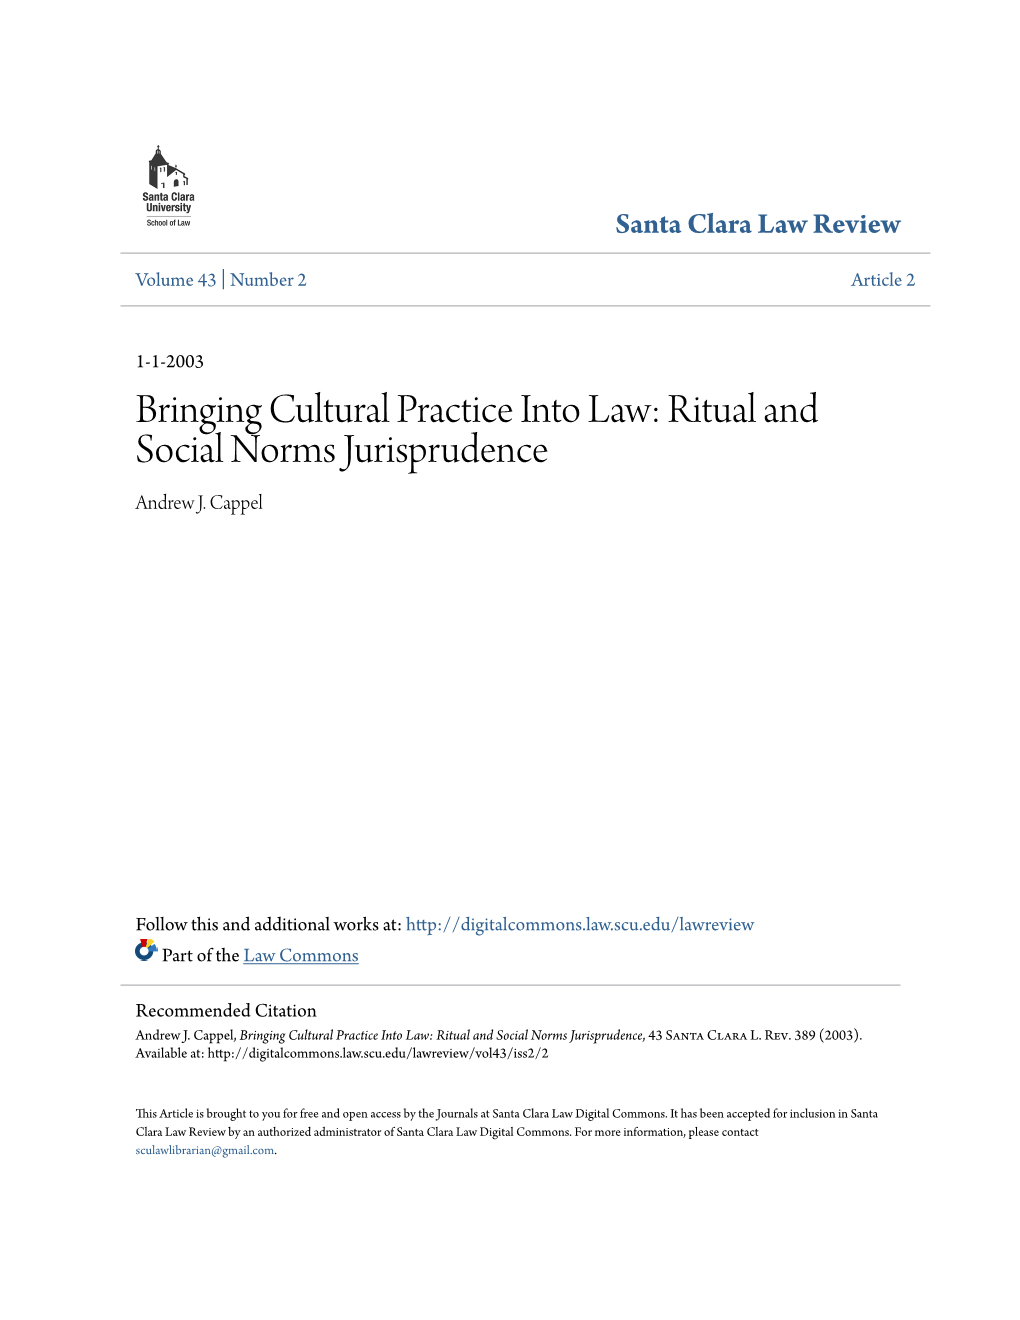 Bringing Cultural Practice Into Law: Ritual and Social Norms Jurisprudence Andrew J